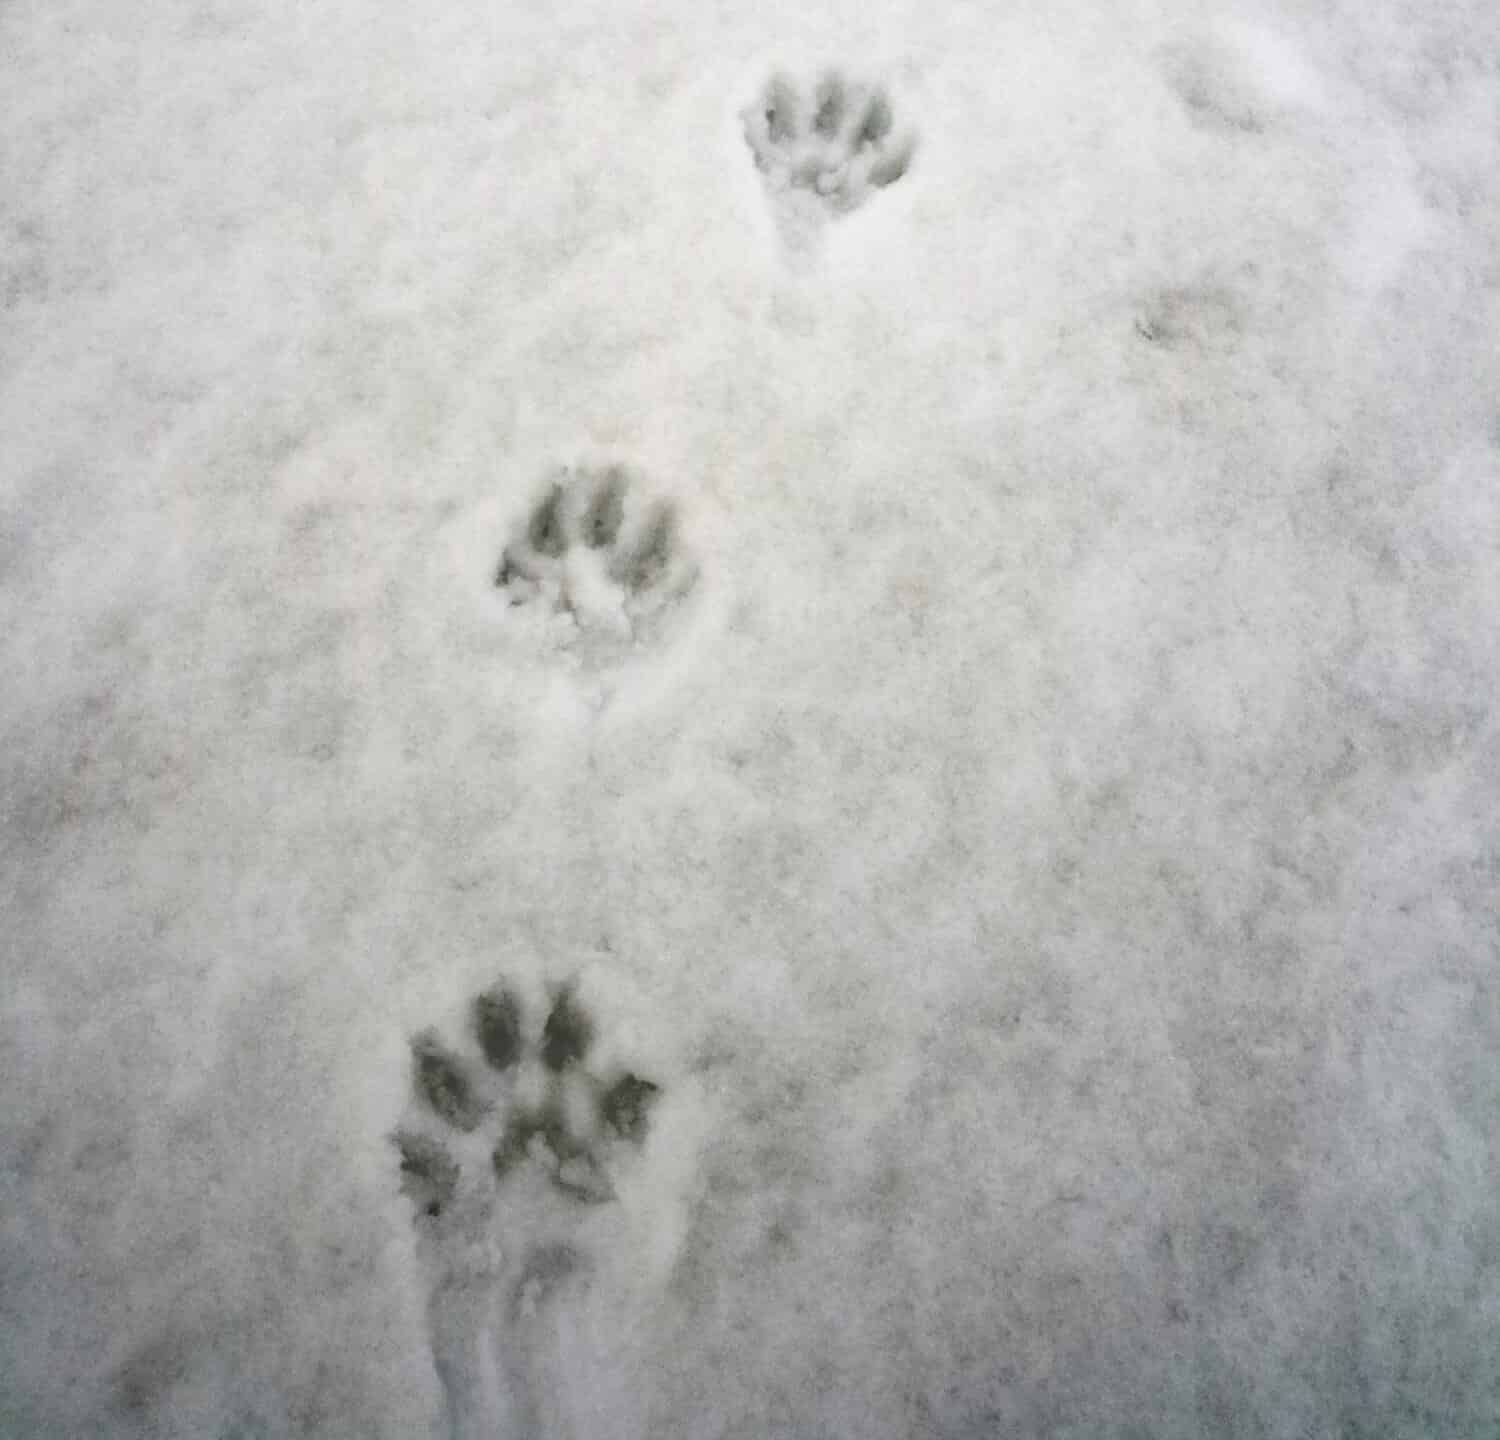 Wolverine Tracks: Identification Guide for Snow, Mud, and More - A-Z ...